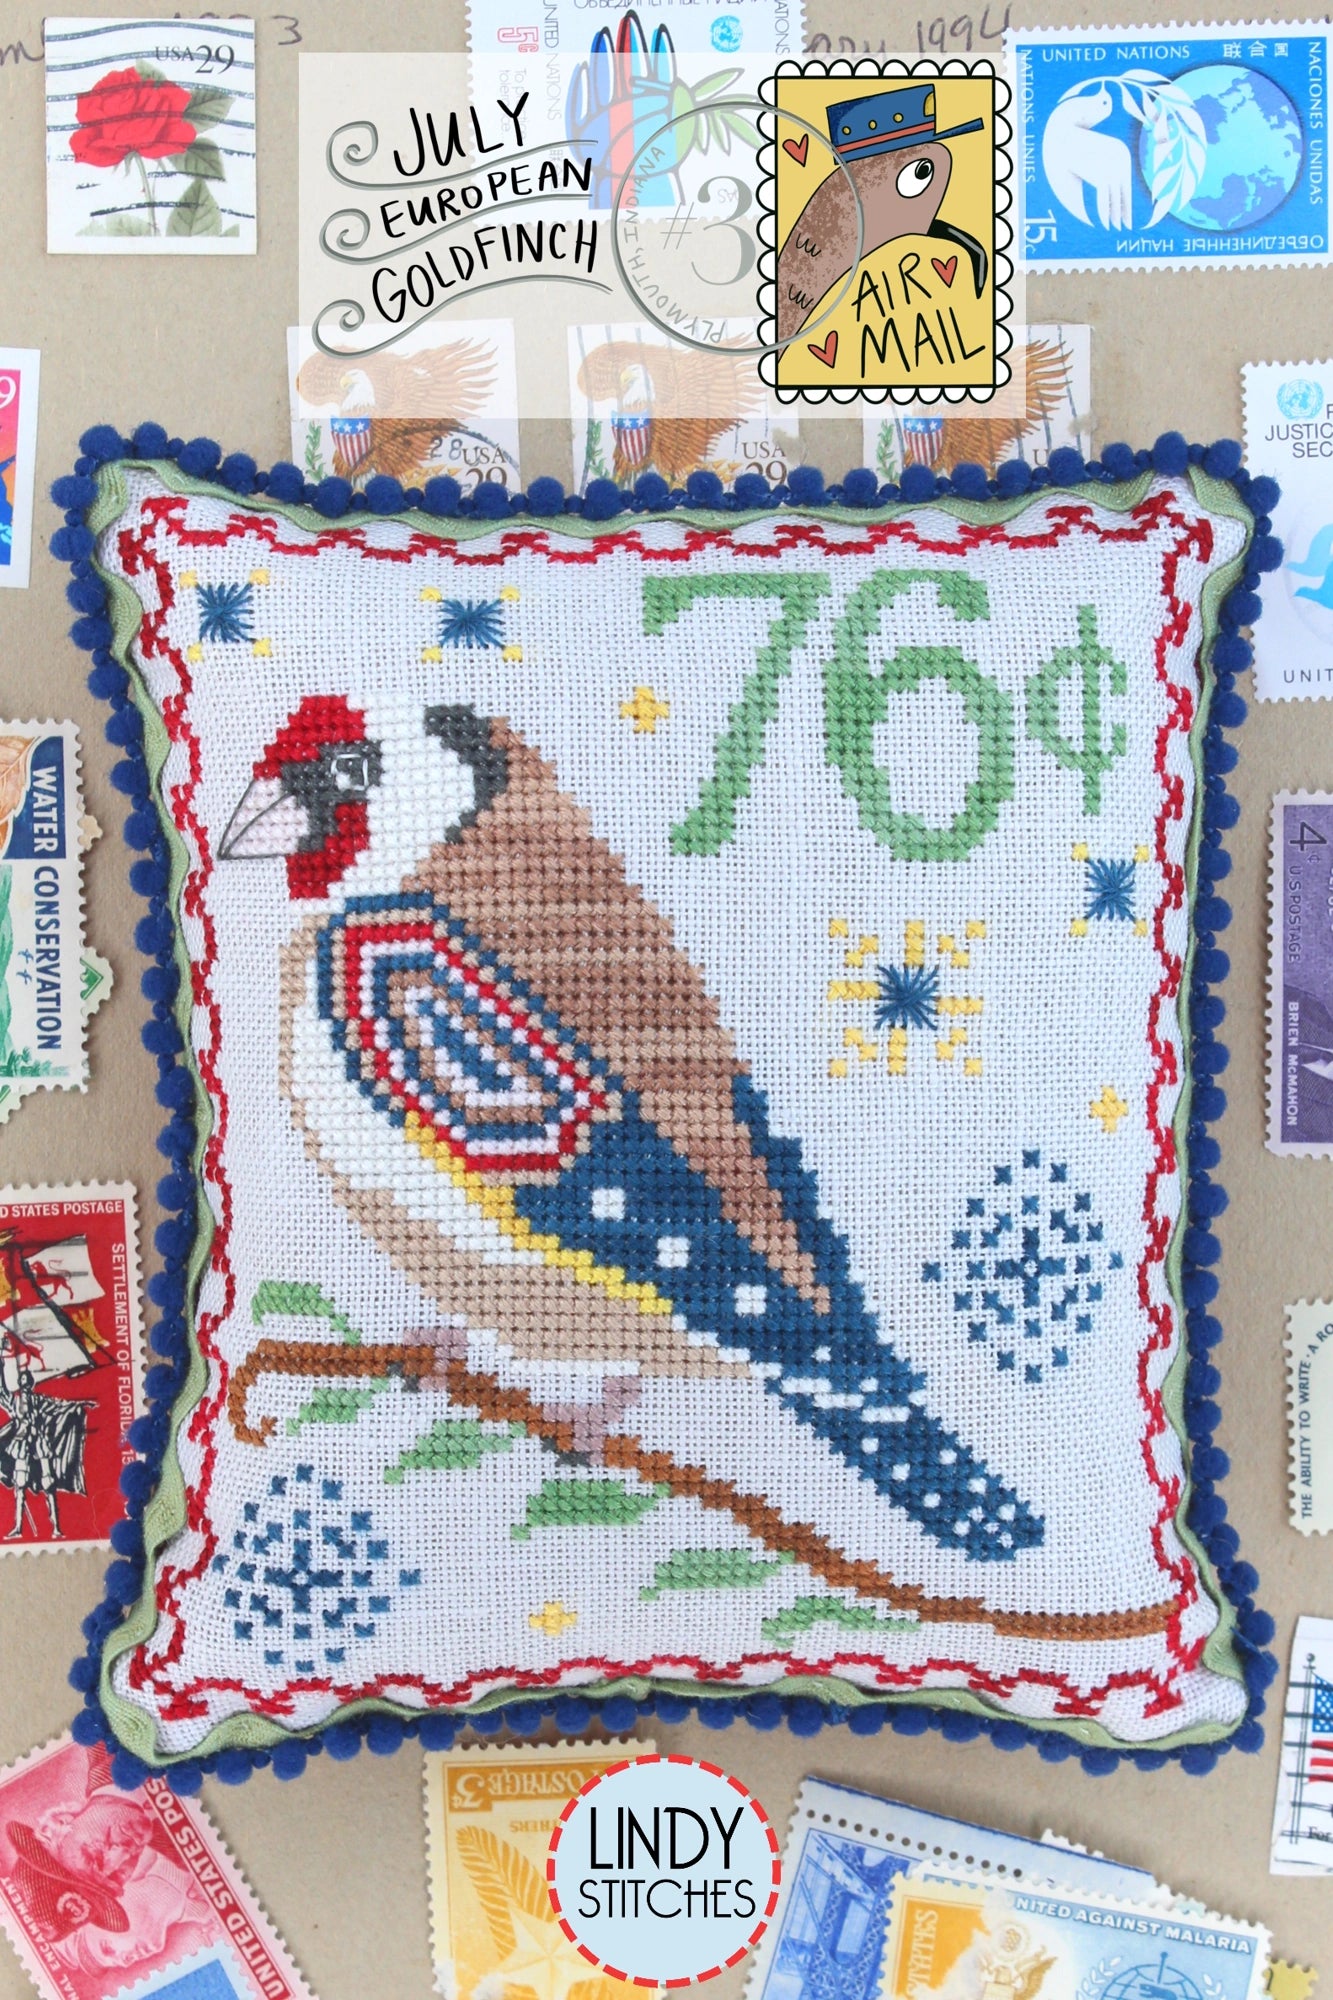 Air Mail July #3 European Goldfinch Cross Stitch Pattern by Lindy Stitches